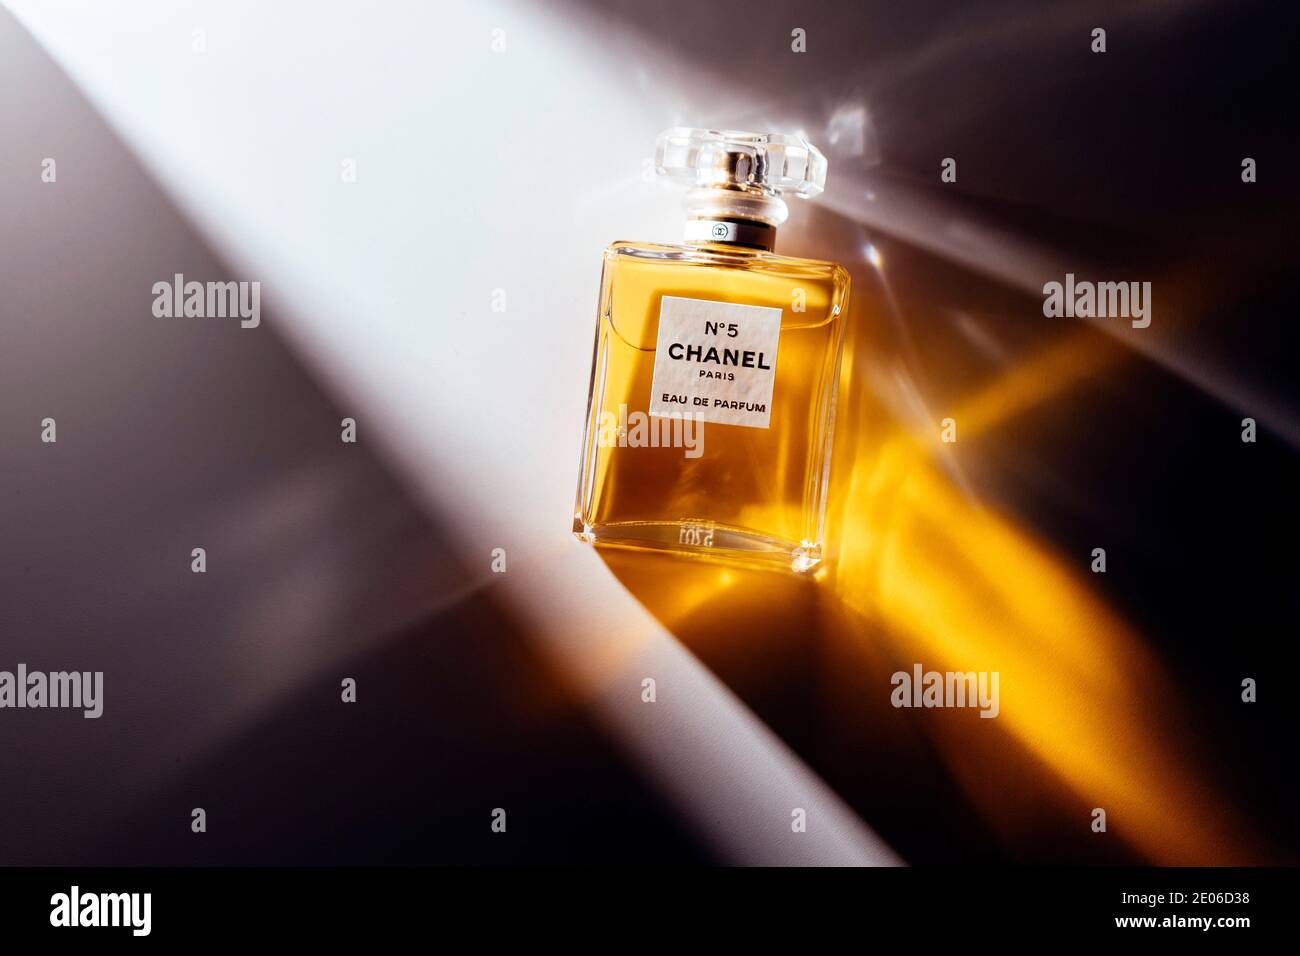 Marion Cotillard 2-page clipping 2021 ad for Chanel No. 5